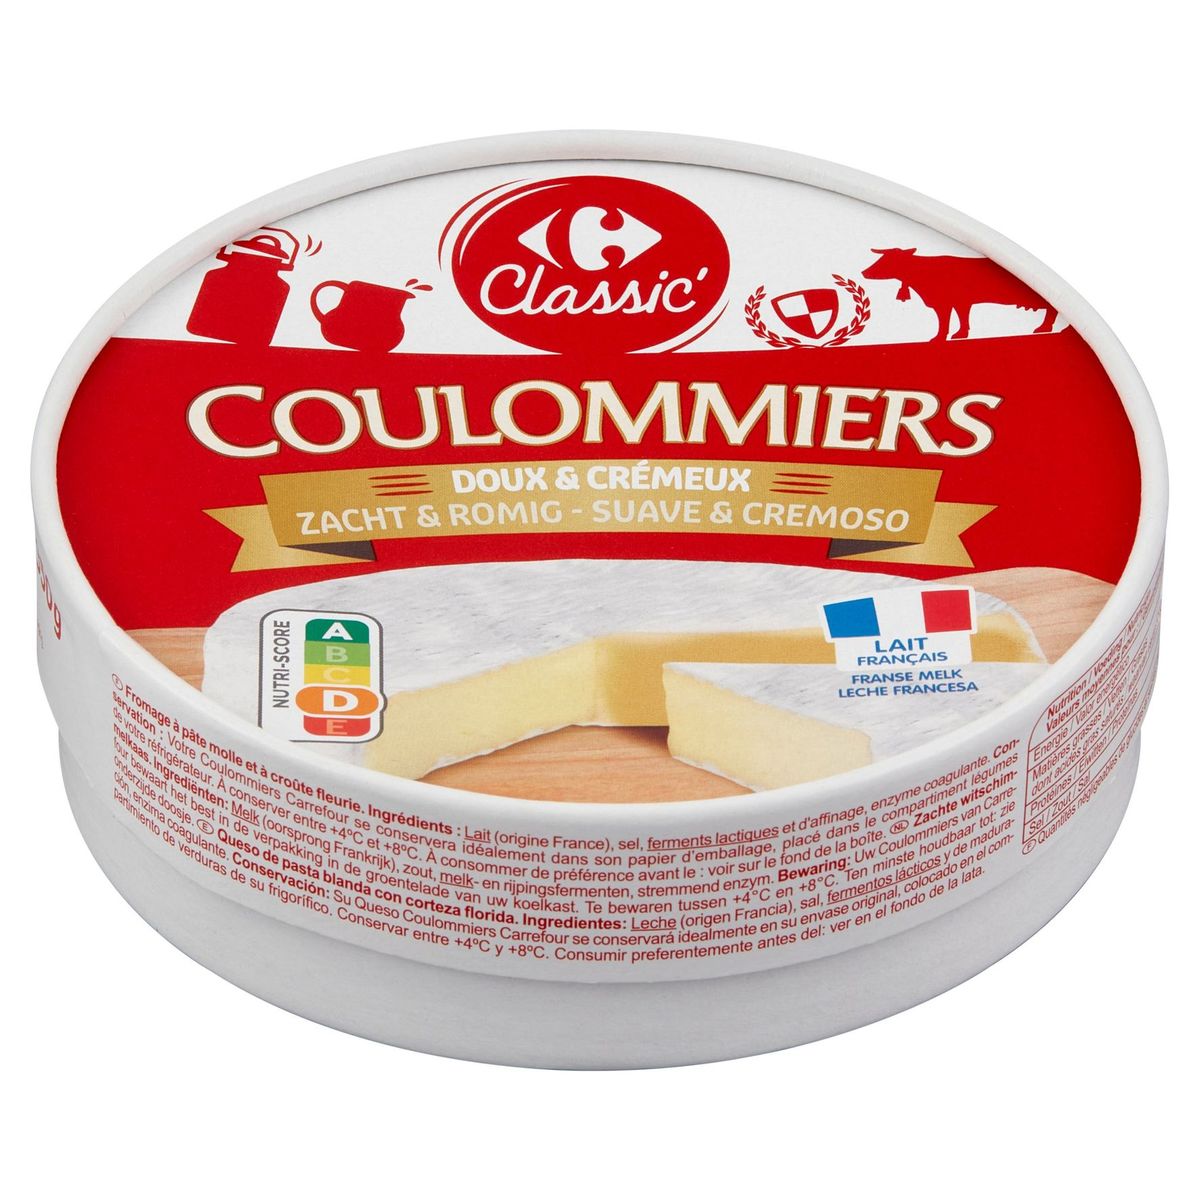 Carrefour Classic' Coulommiers Zacht & Romig 350 g